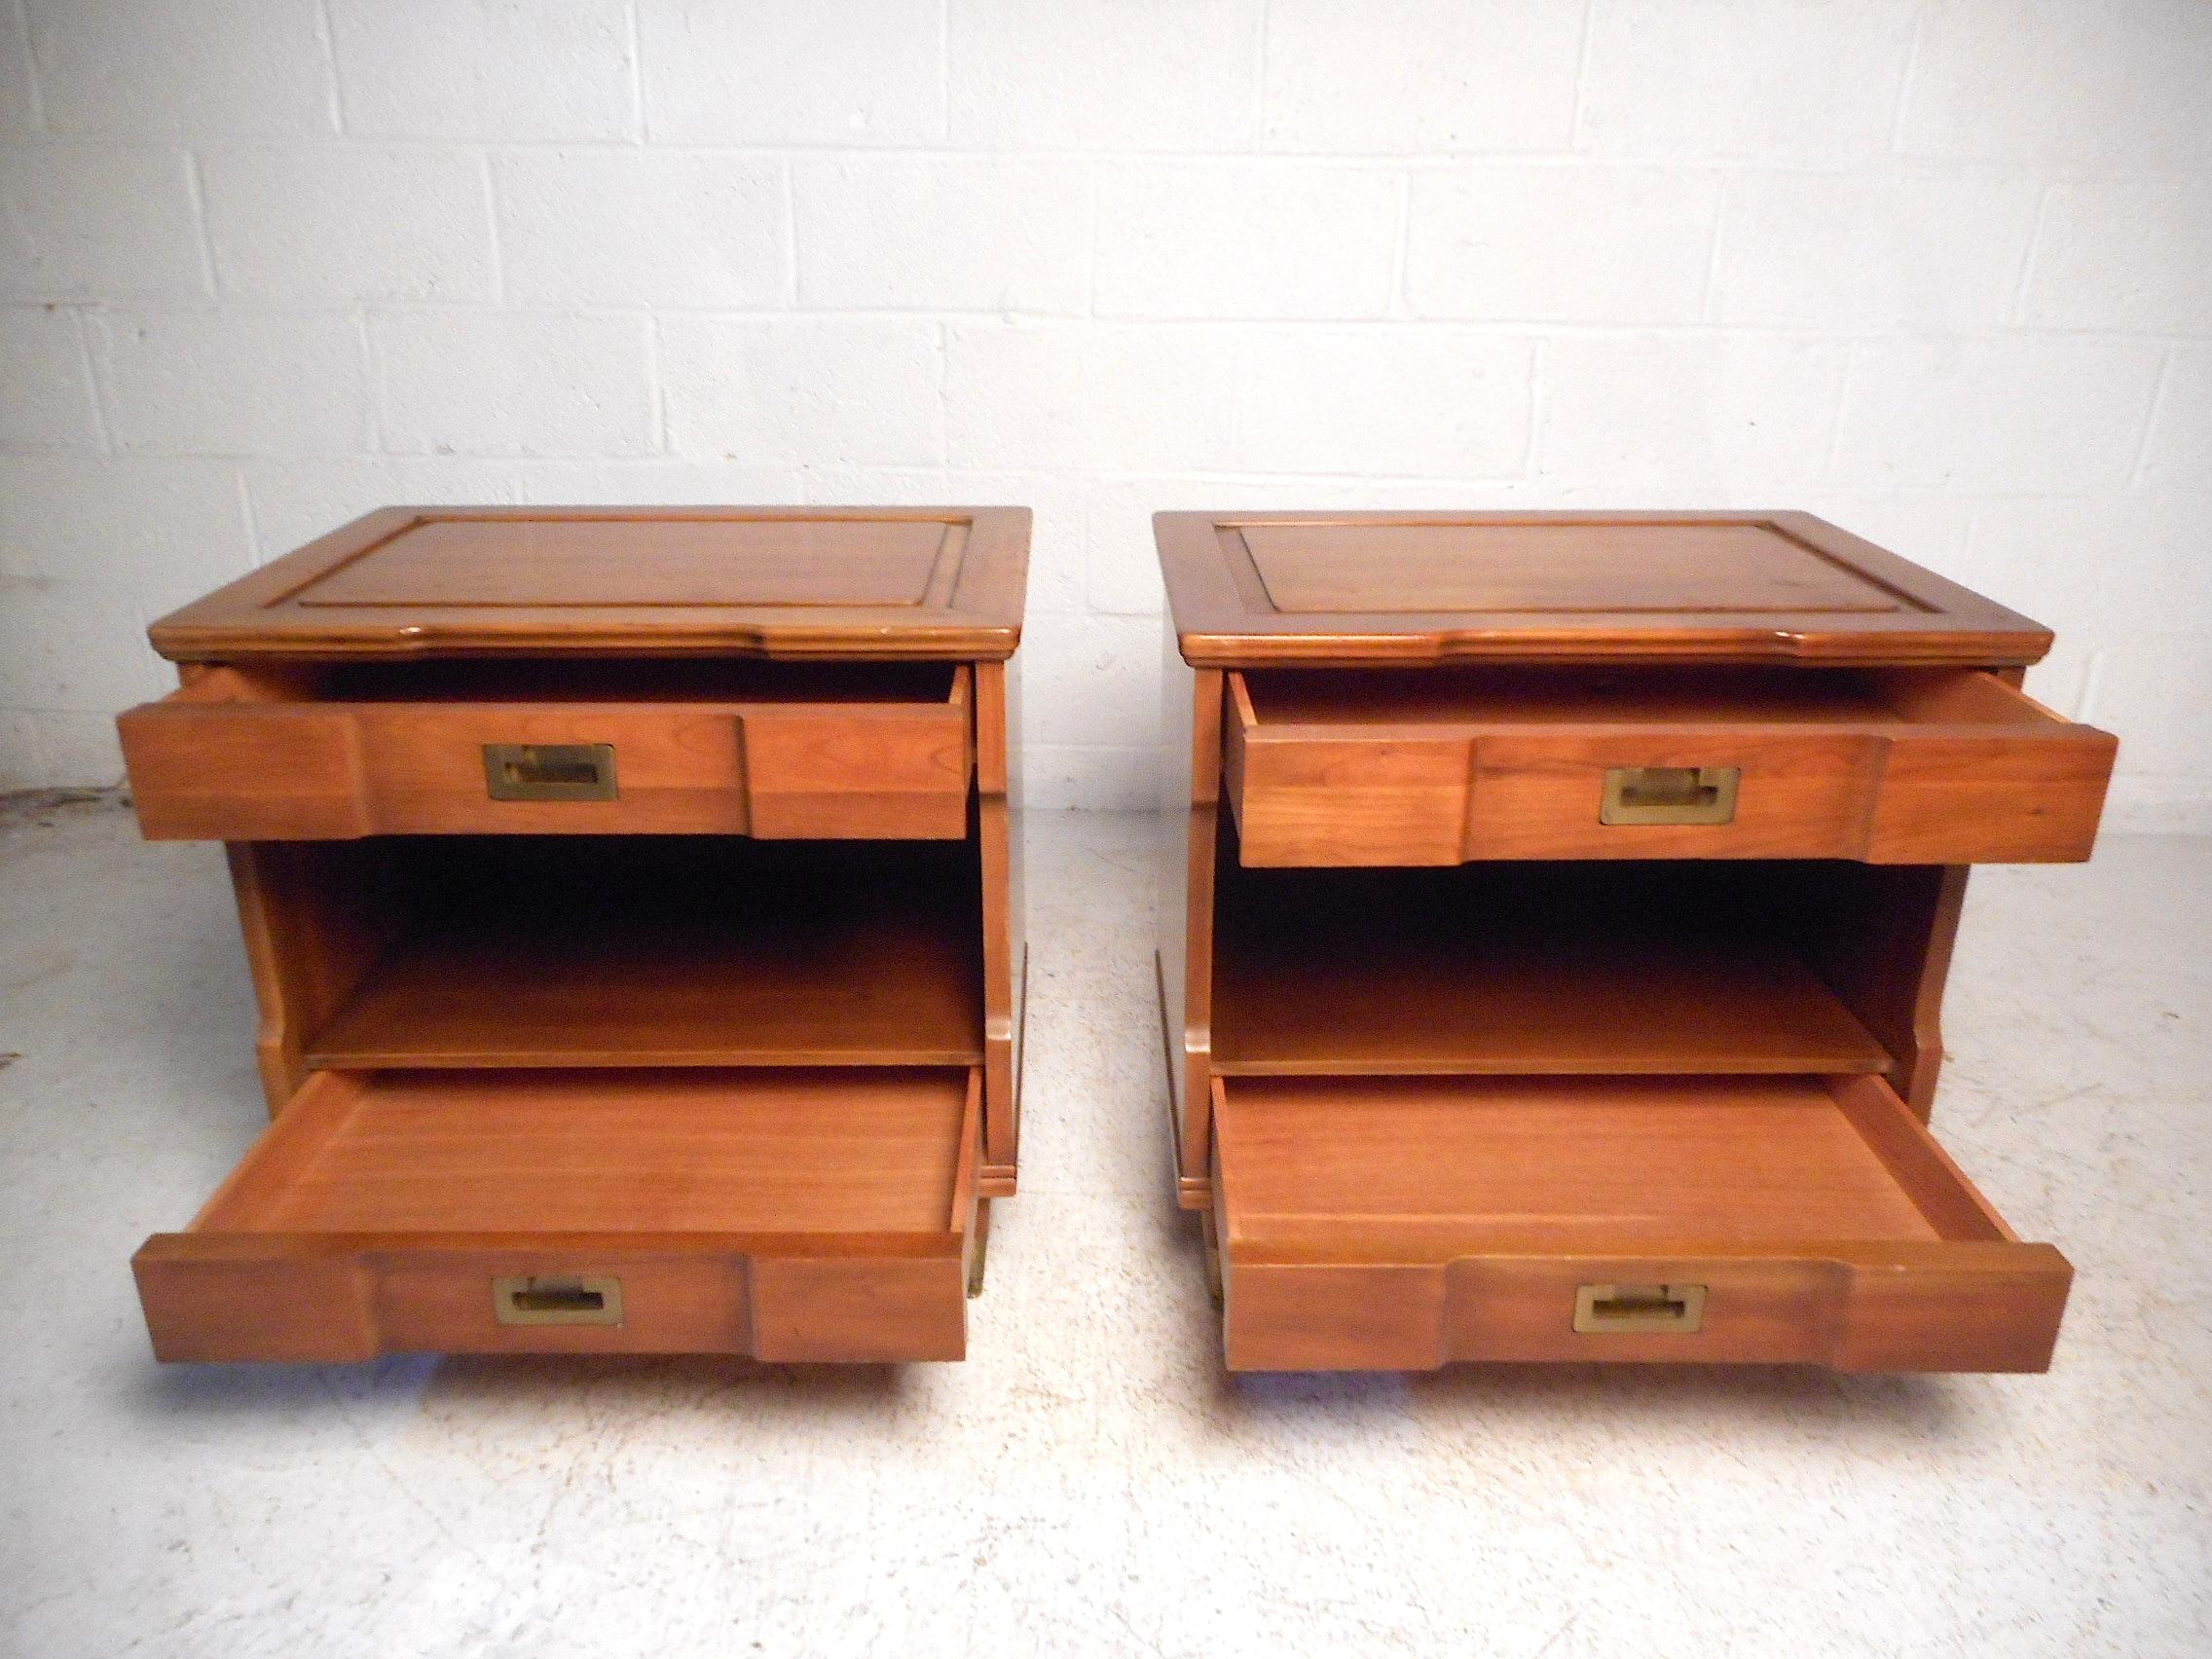 This stylish pair of vintage modern nightstands feature a sturdy walnut construction with a lightly colored finish, two drawers with dovetail wood-joints signifying quality craftsmanship while offering ample storage space, brass Campaign style